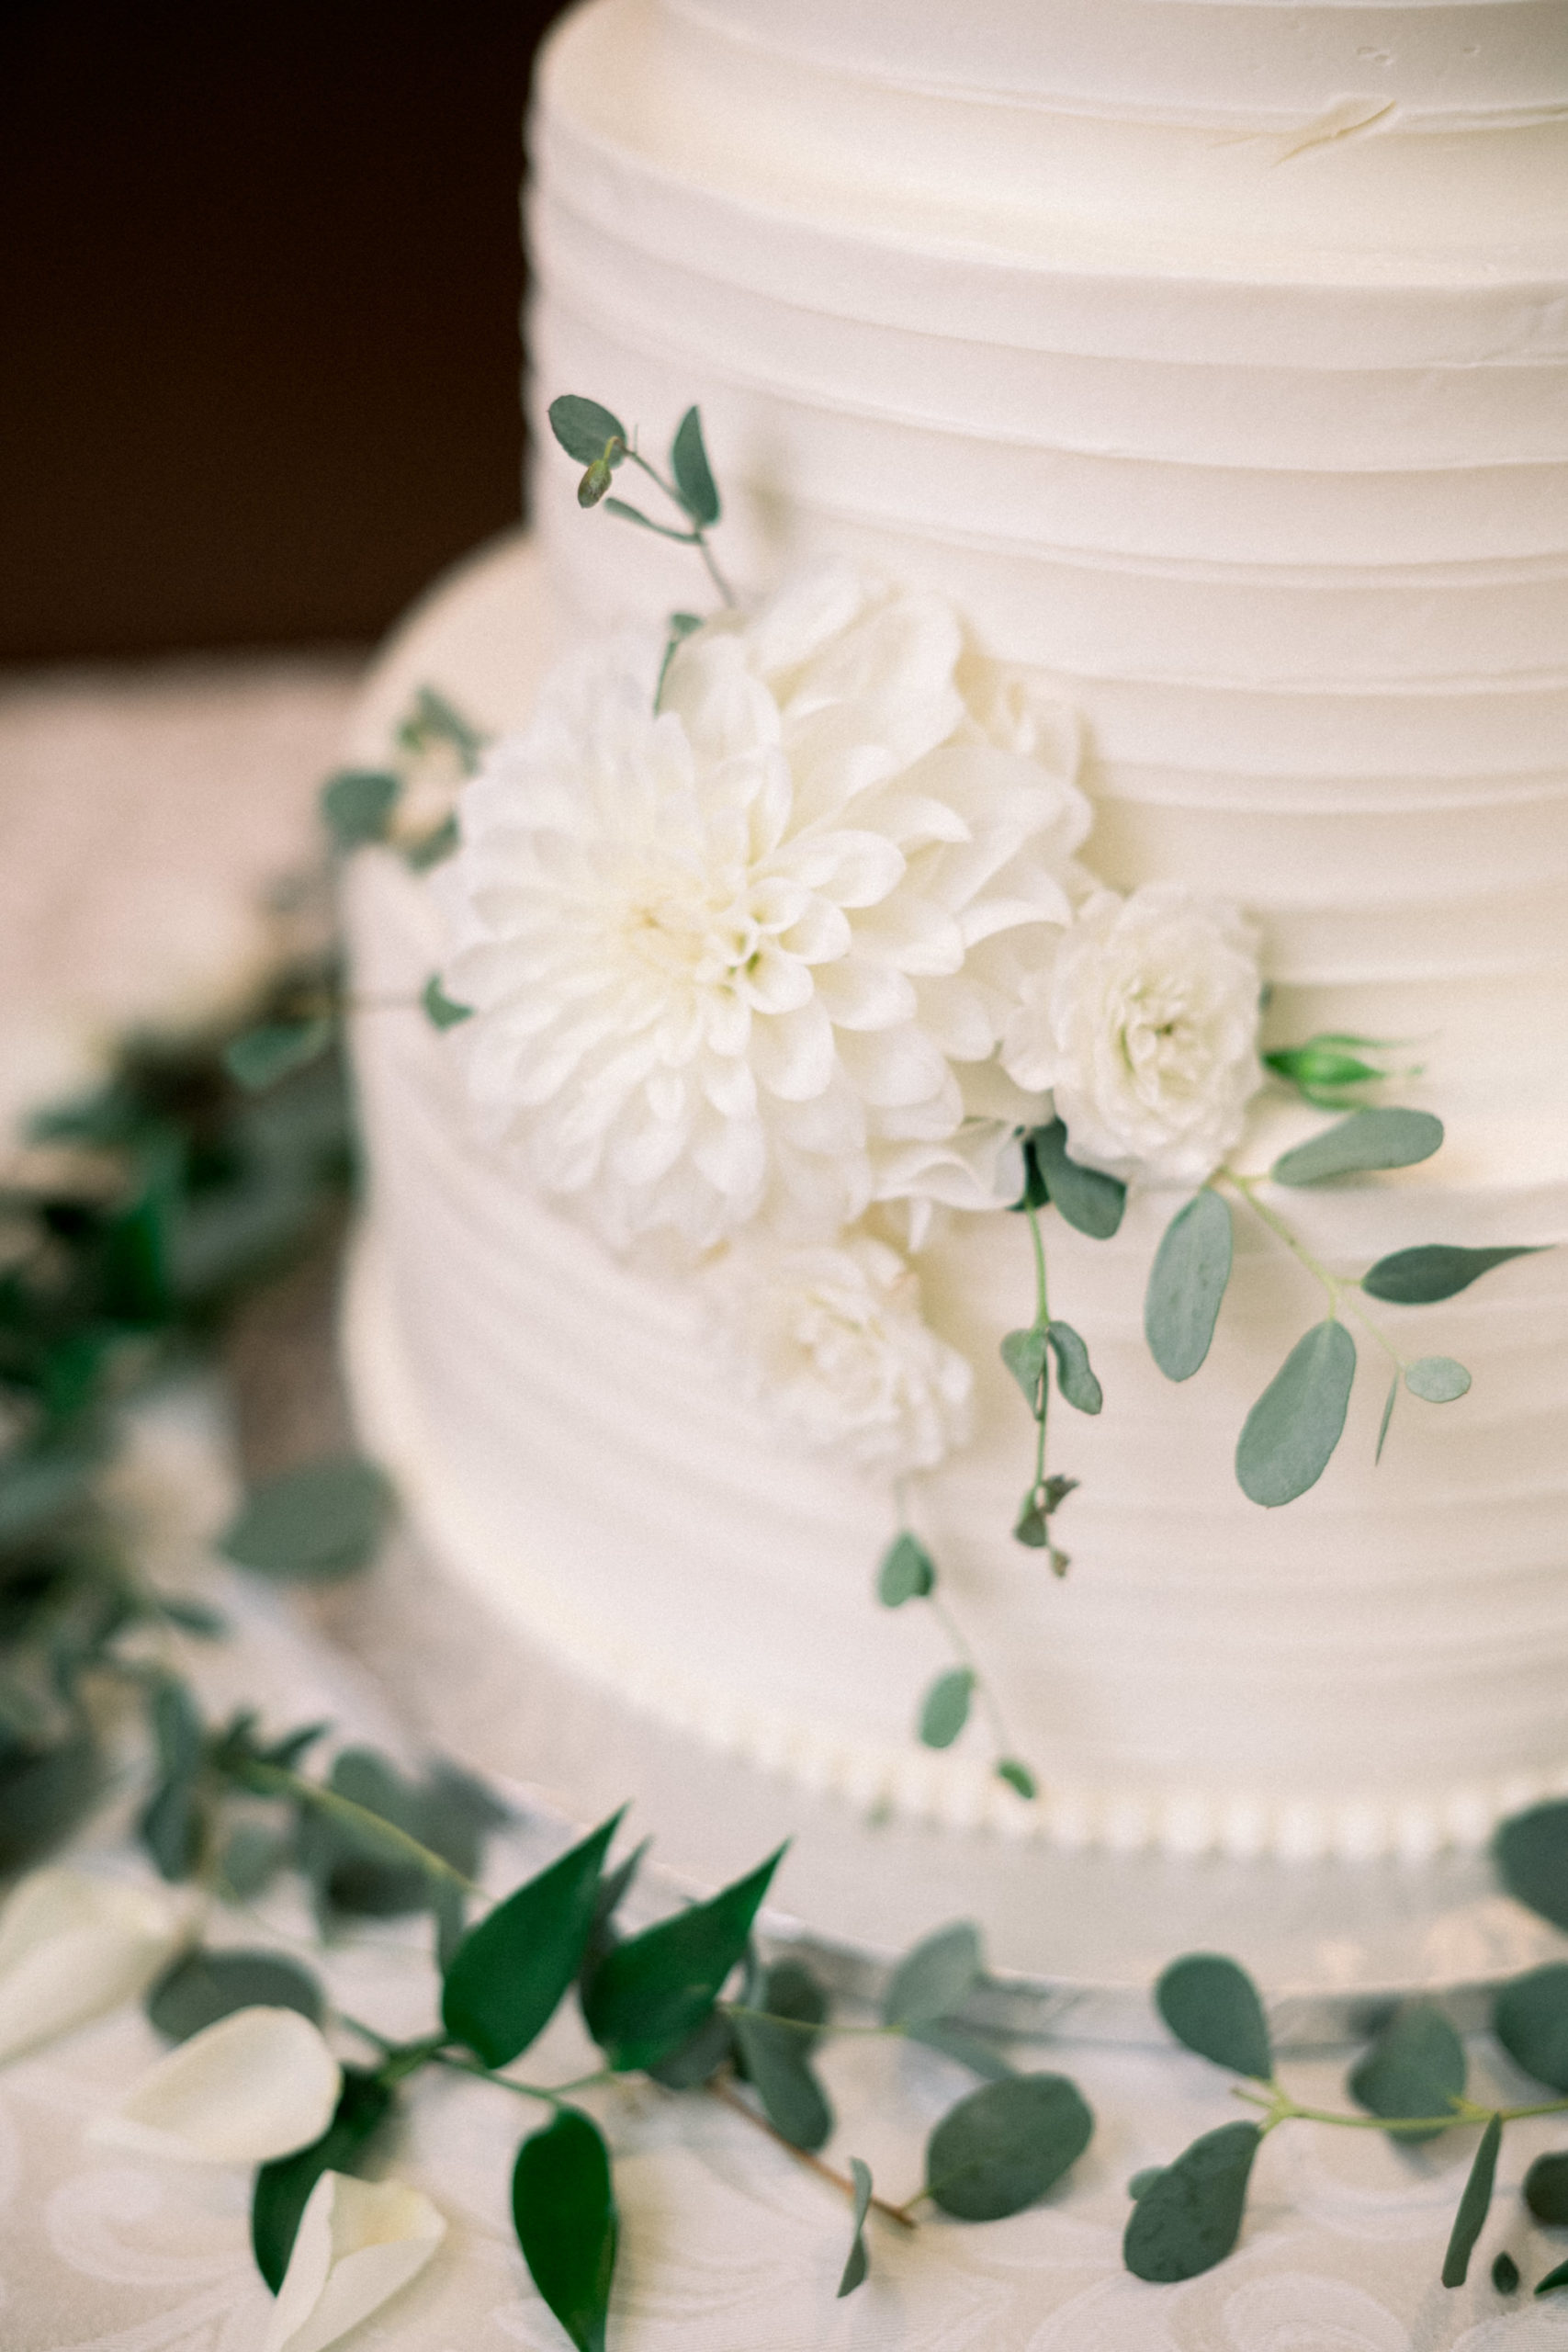 detail shot of white wedding cake with white florals on the base of the wedding cake